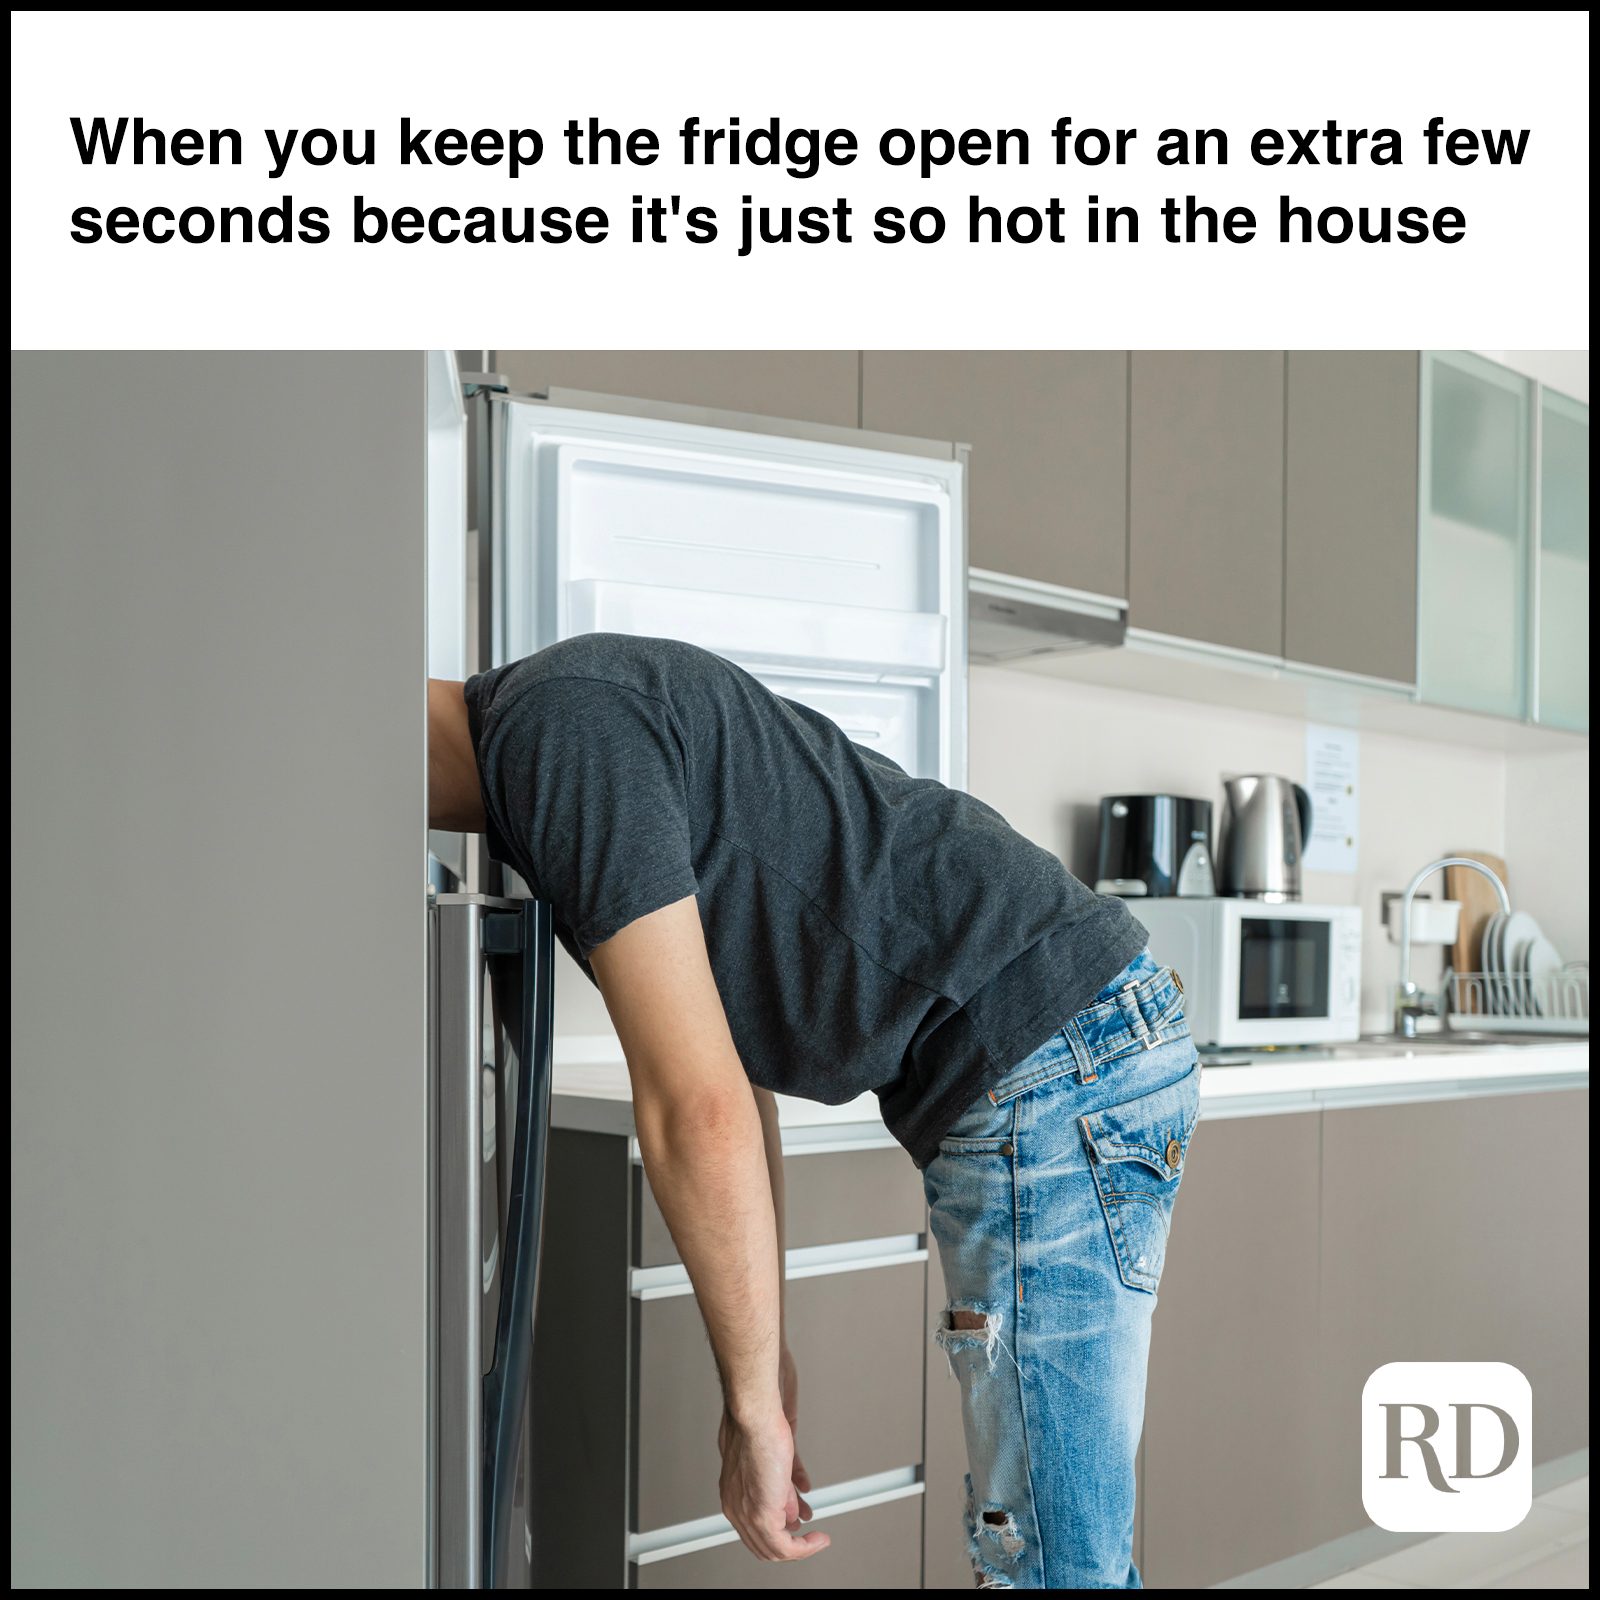 Man with head in fridge MEME TEXT: When you keep the fridge open for an extra few seconds because it's just so hot in the house